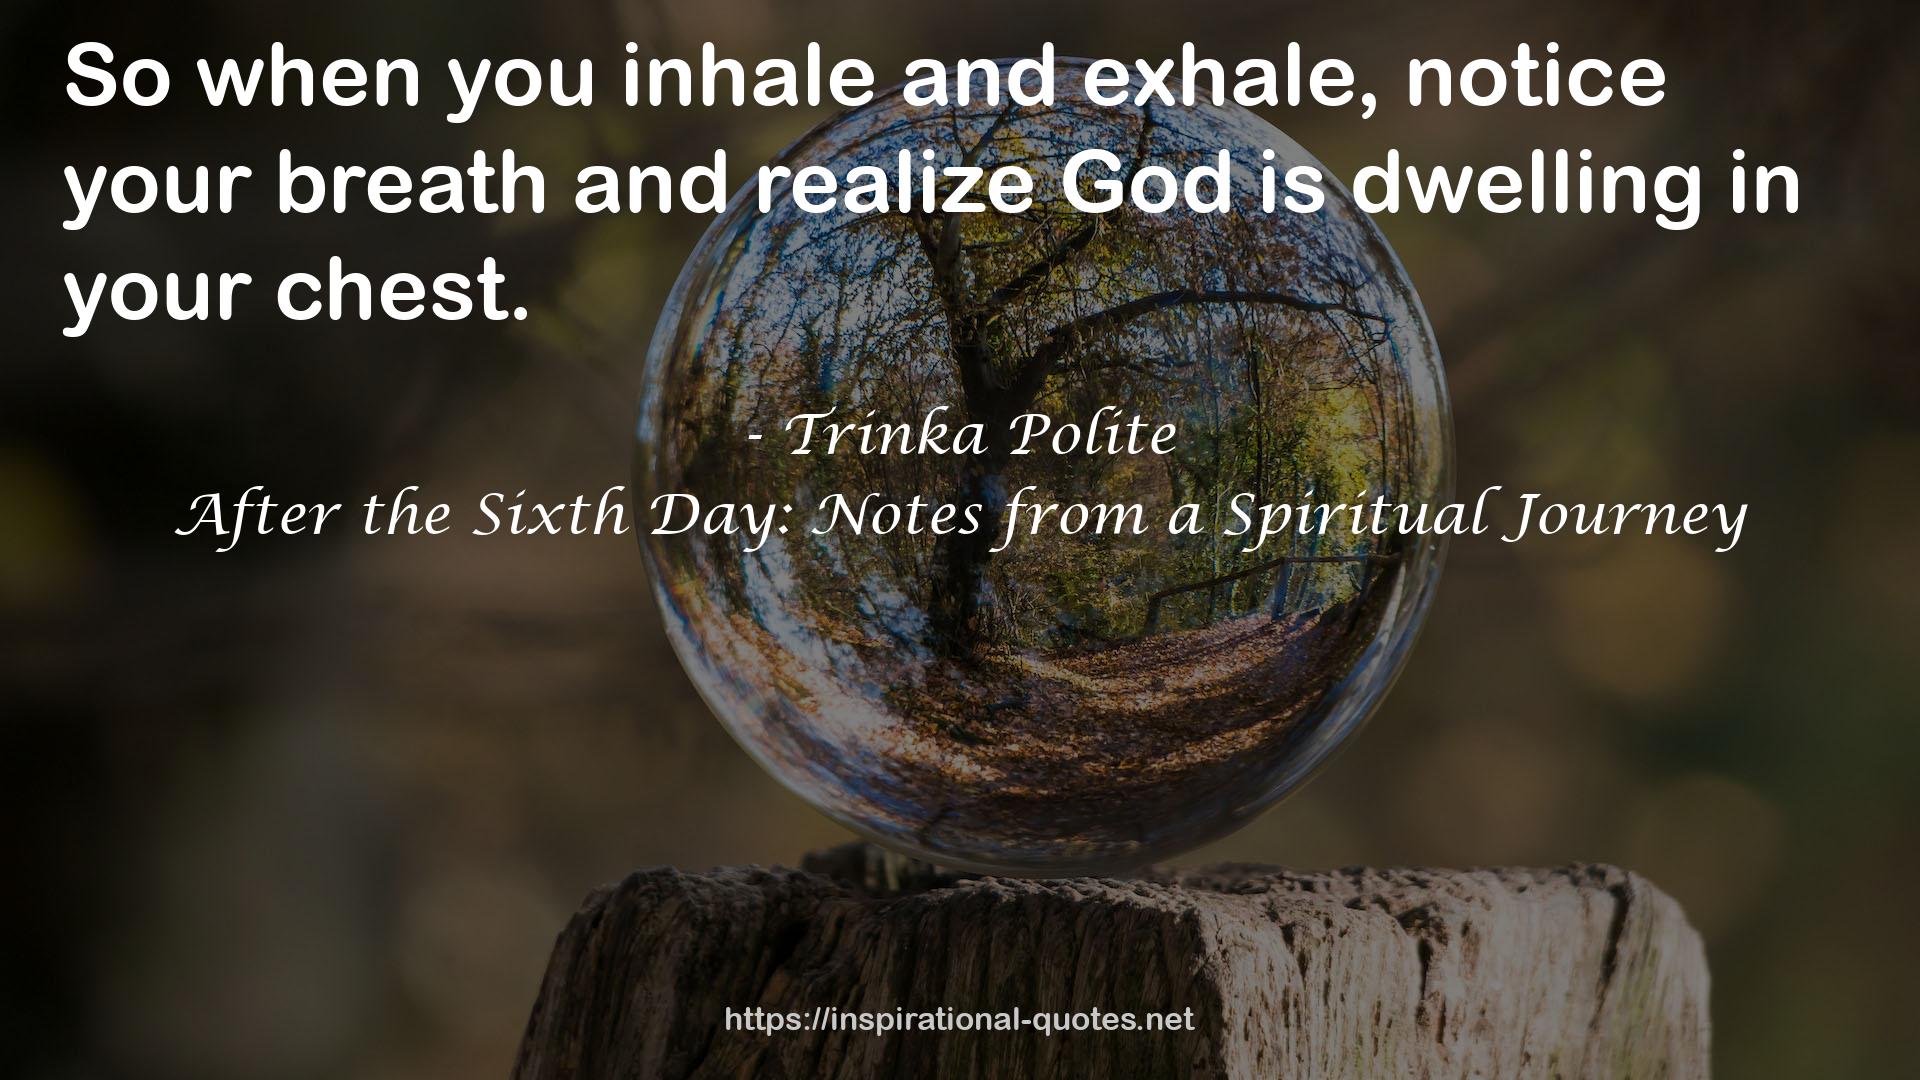 After the Sixth Day: Notes from a Spiritual Journey QUOTES